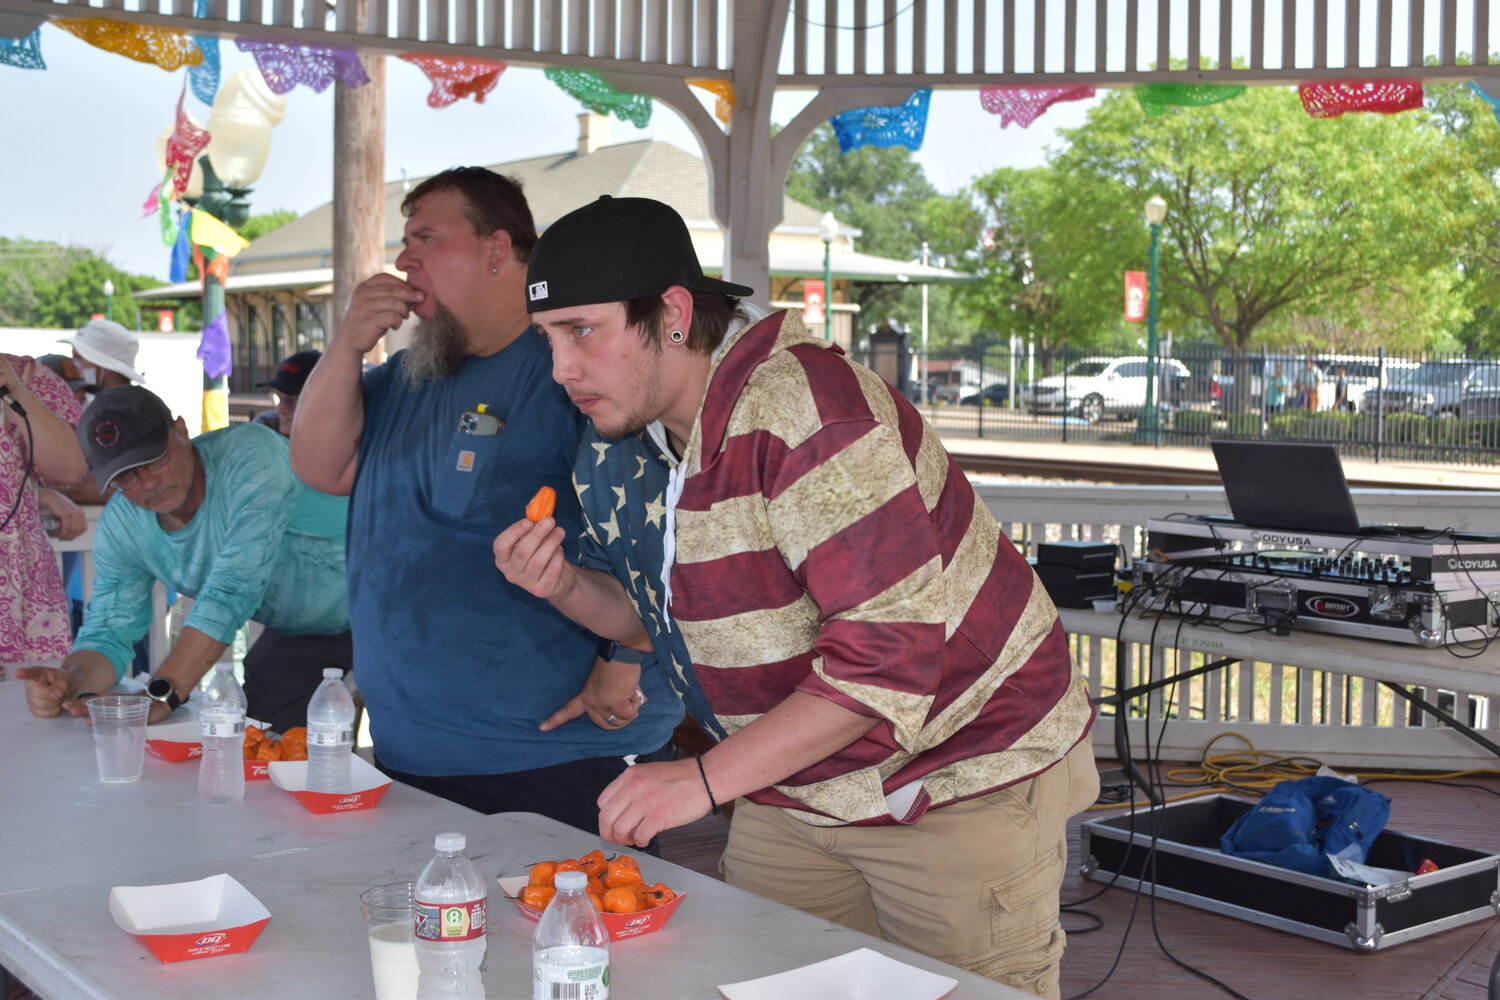 Keith Fisher, left, outdueled Ricki Phelps to win the pepper-eating contest. (Monitor photo by Phil Major)